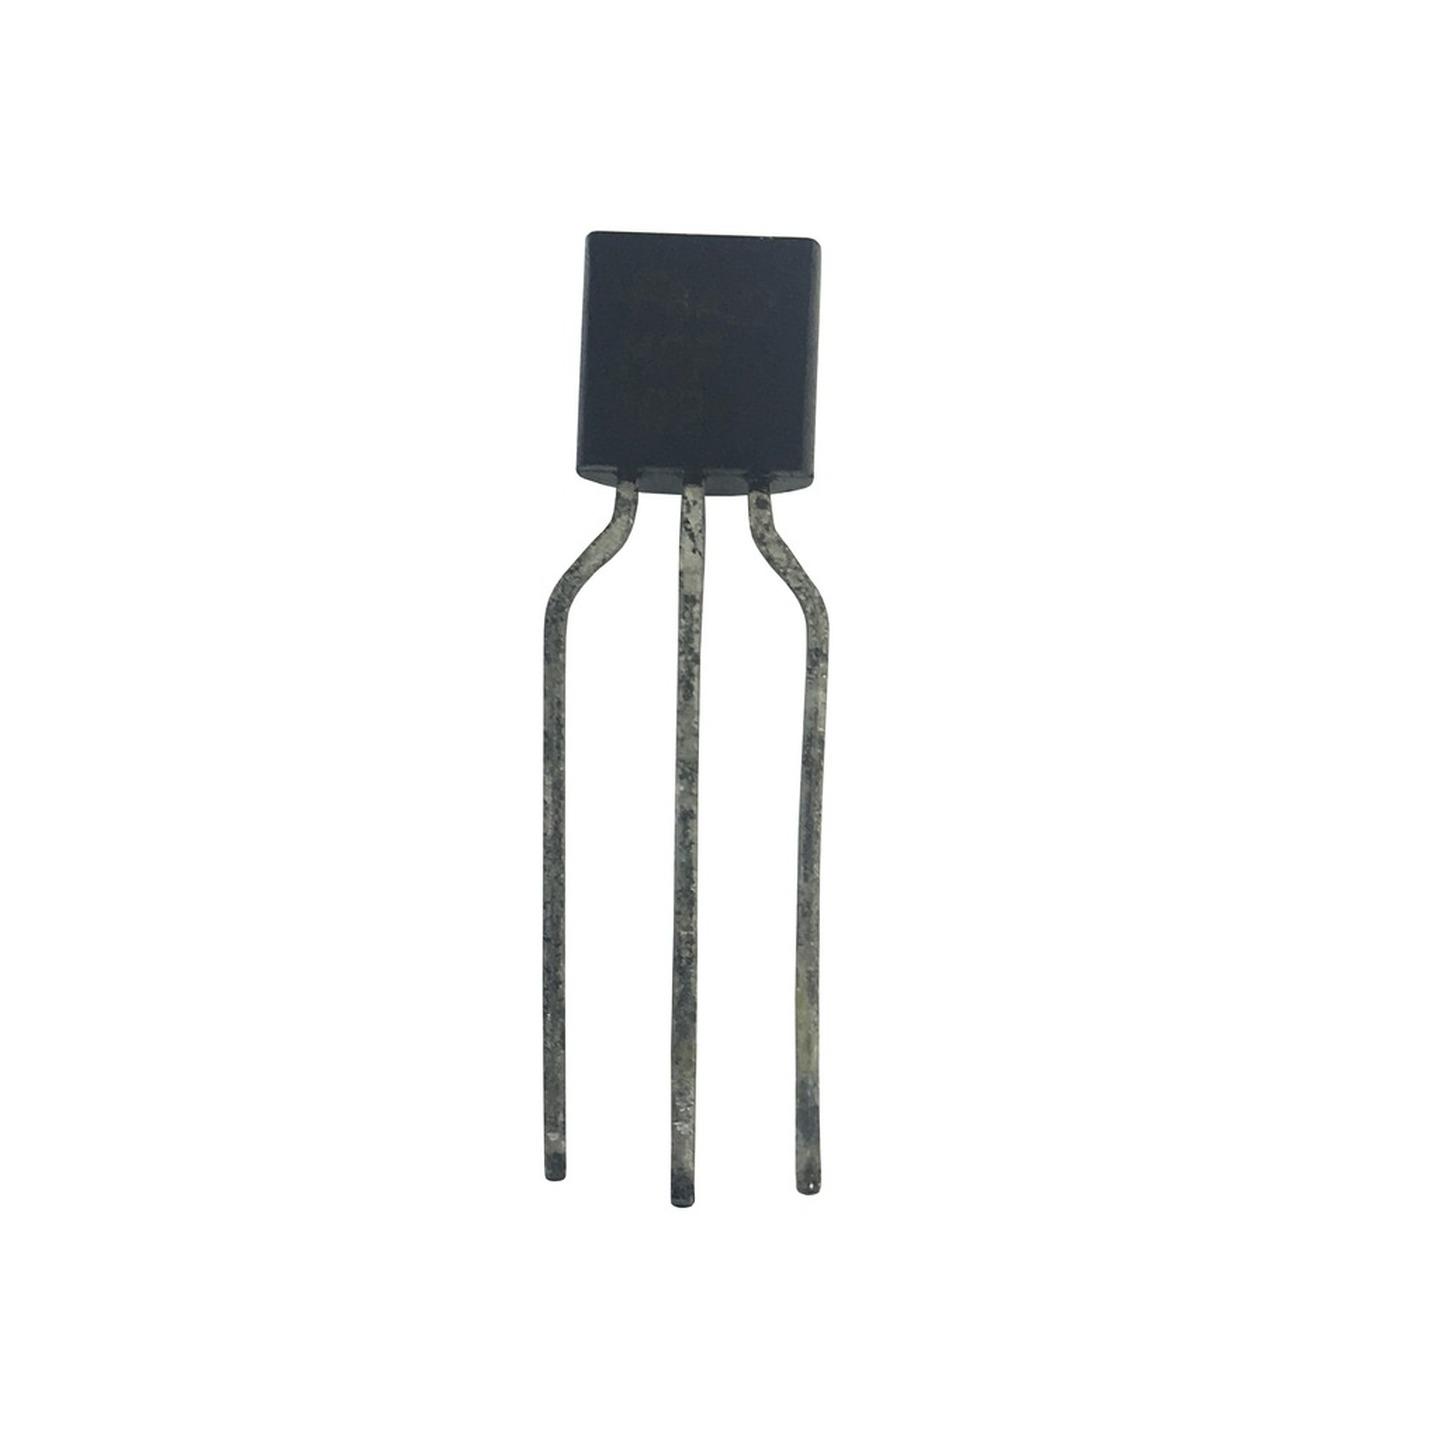 LM334Z Adjustable Current Source Linear IC